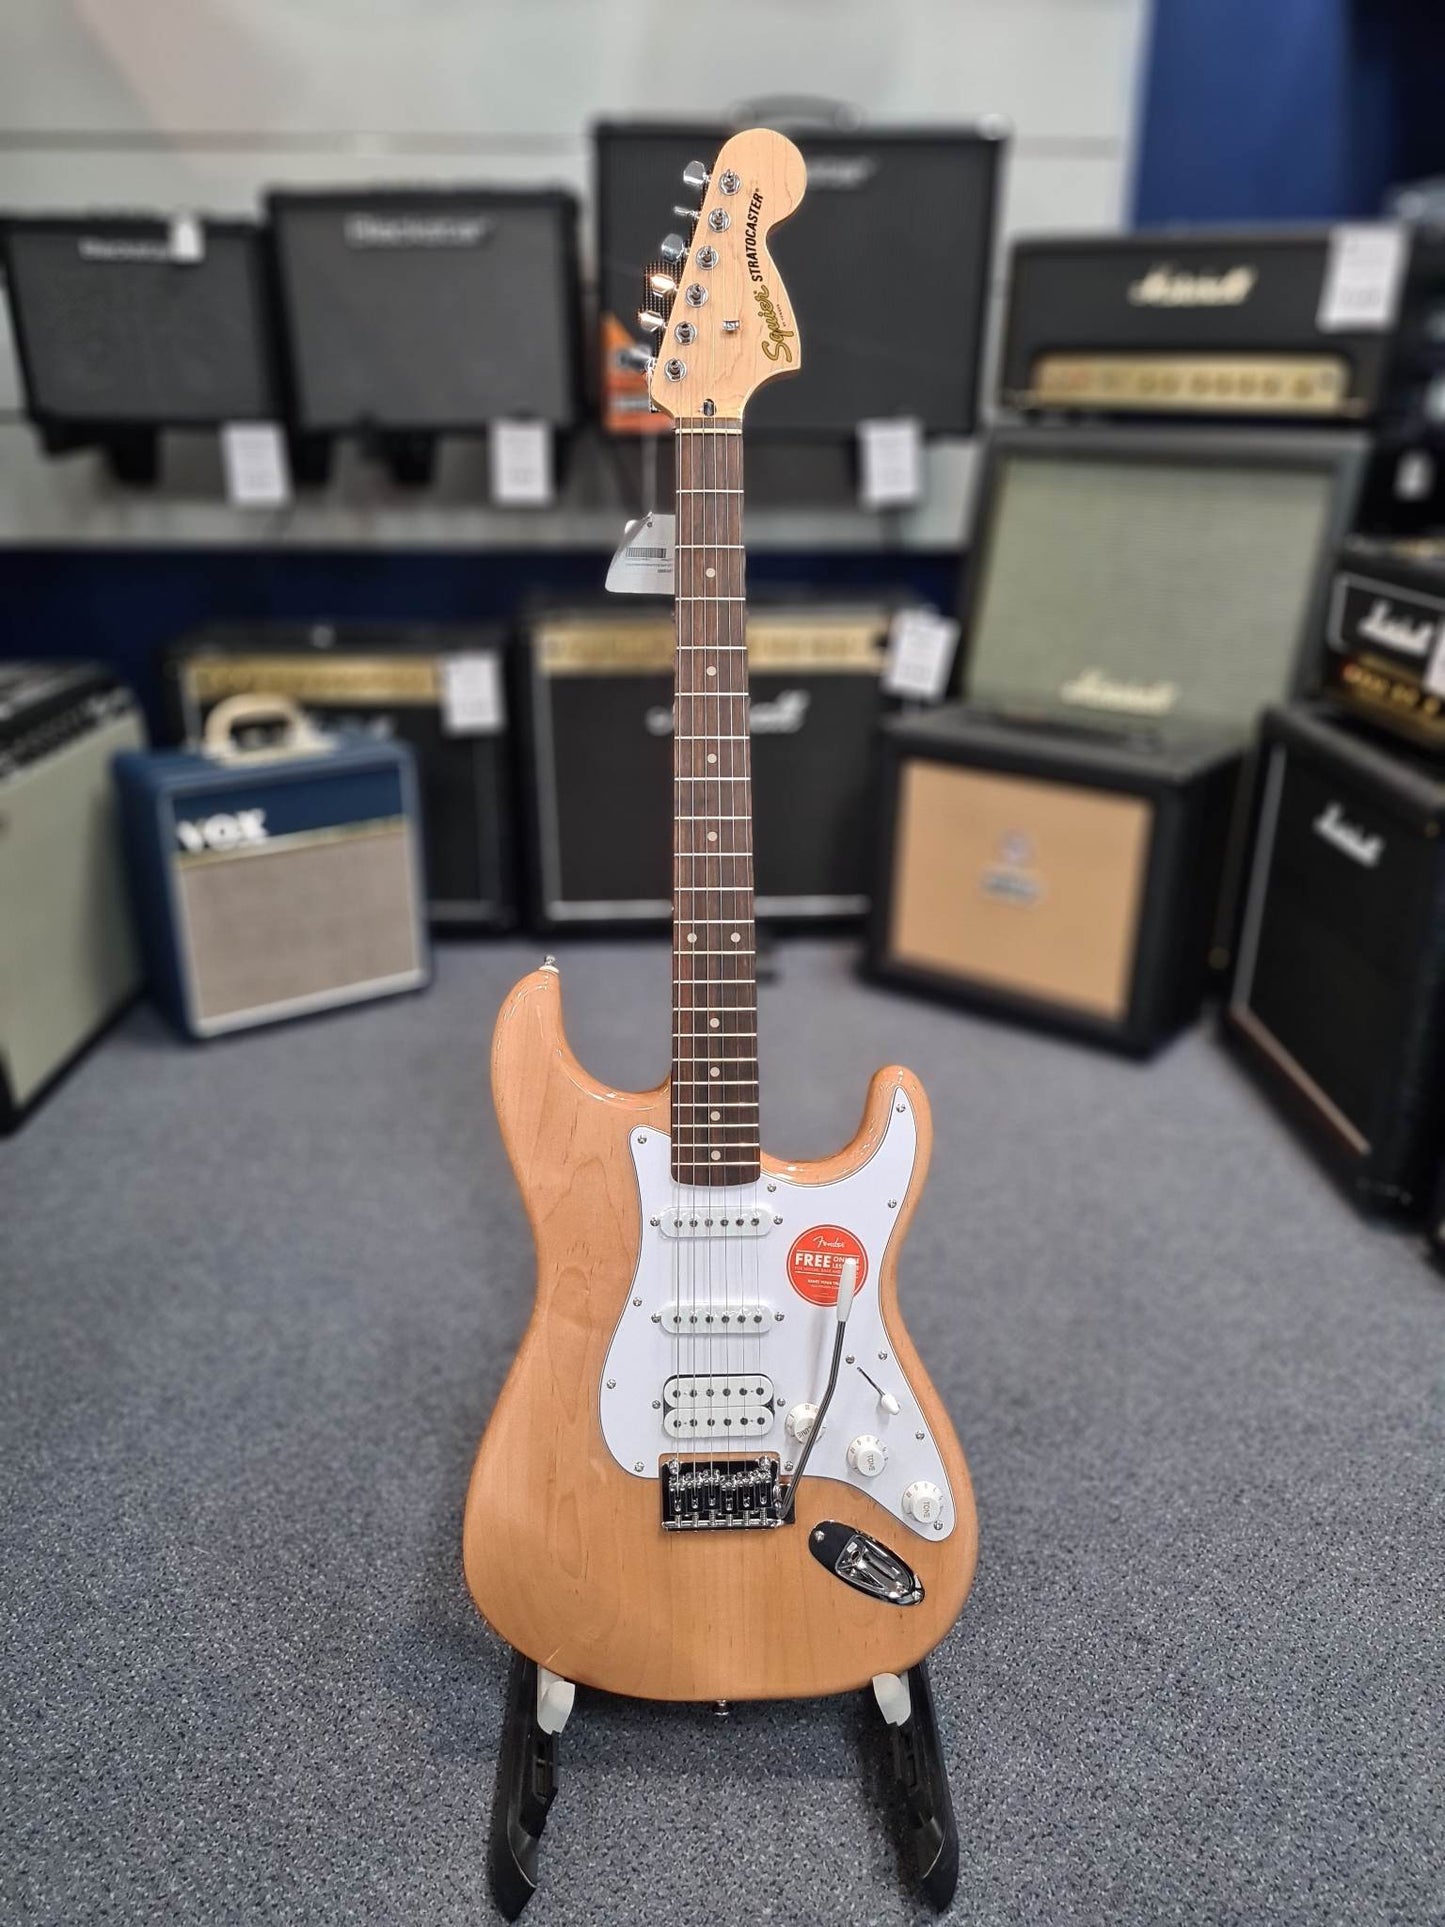 Squier Affinity Stratocaster HSS Natural